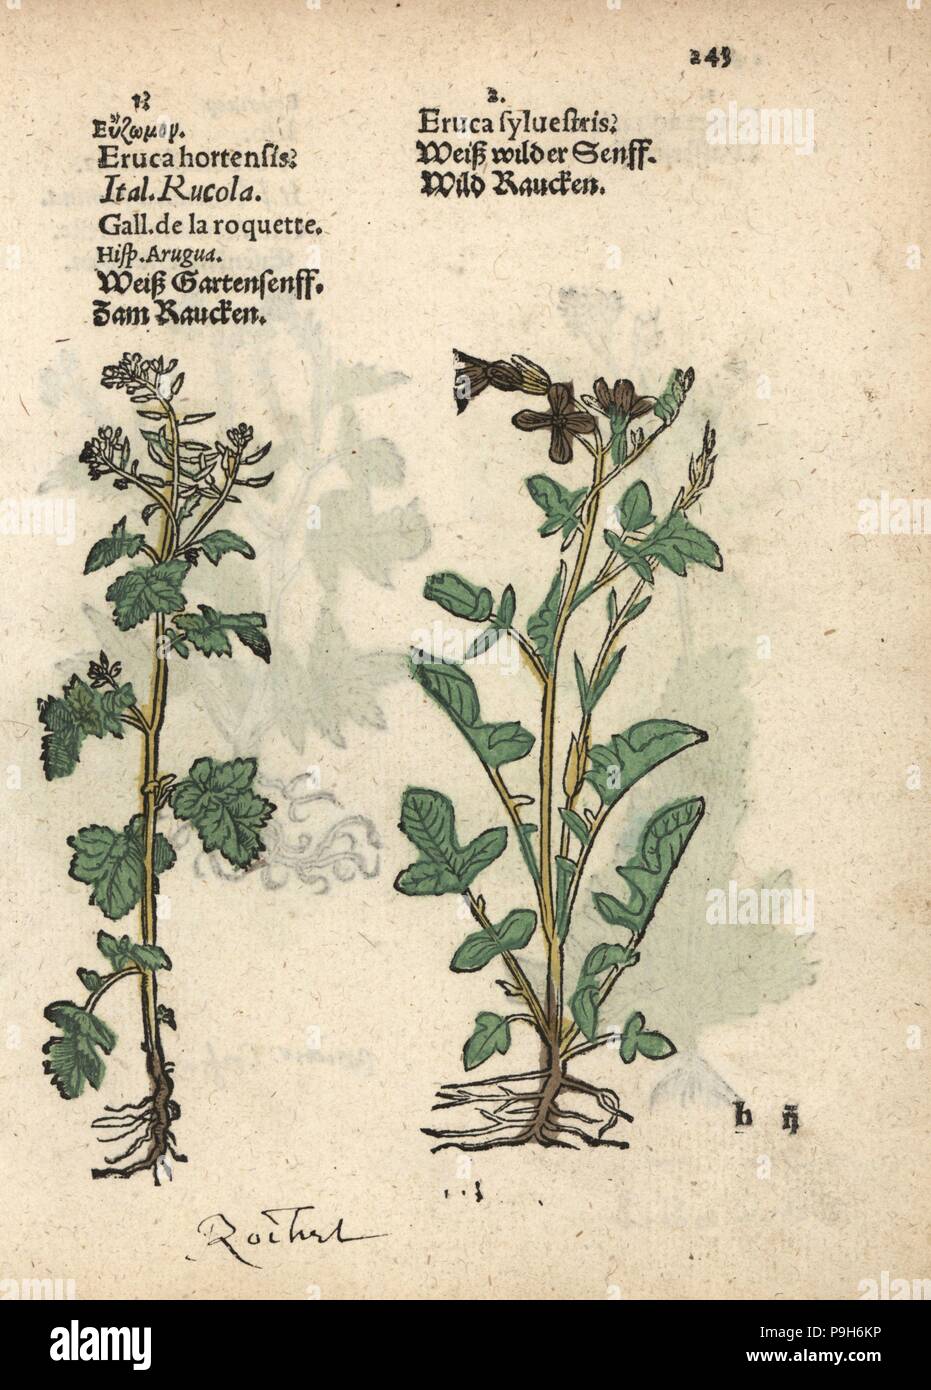 Rocket or arugula, Eruca sativa, and dogmustard, Erucastrum nasturtiifolium. Handcoloured woodblock engraving of a botanical illustration from Adam Lonicer's Krauterbuch, or Herbal, Frankfurt, 1557. This from a 17th century pirate edition or atlas of illustrations only, with captions in Latin, Greek, French, Italian, German, and in English manuscript. Stock Photo